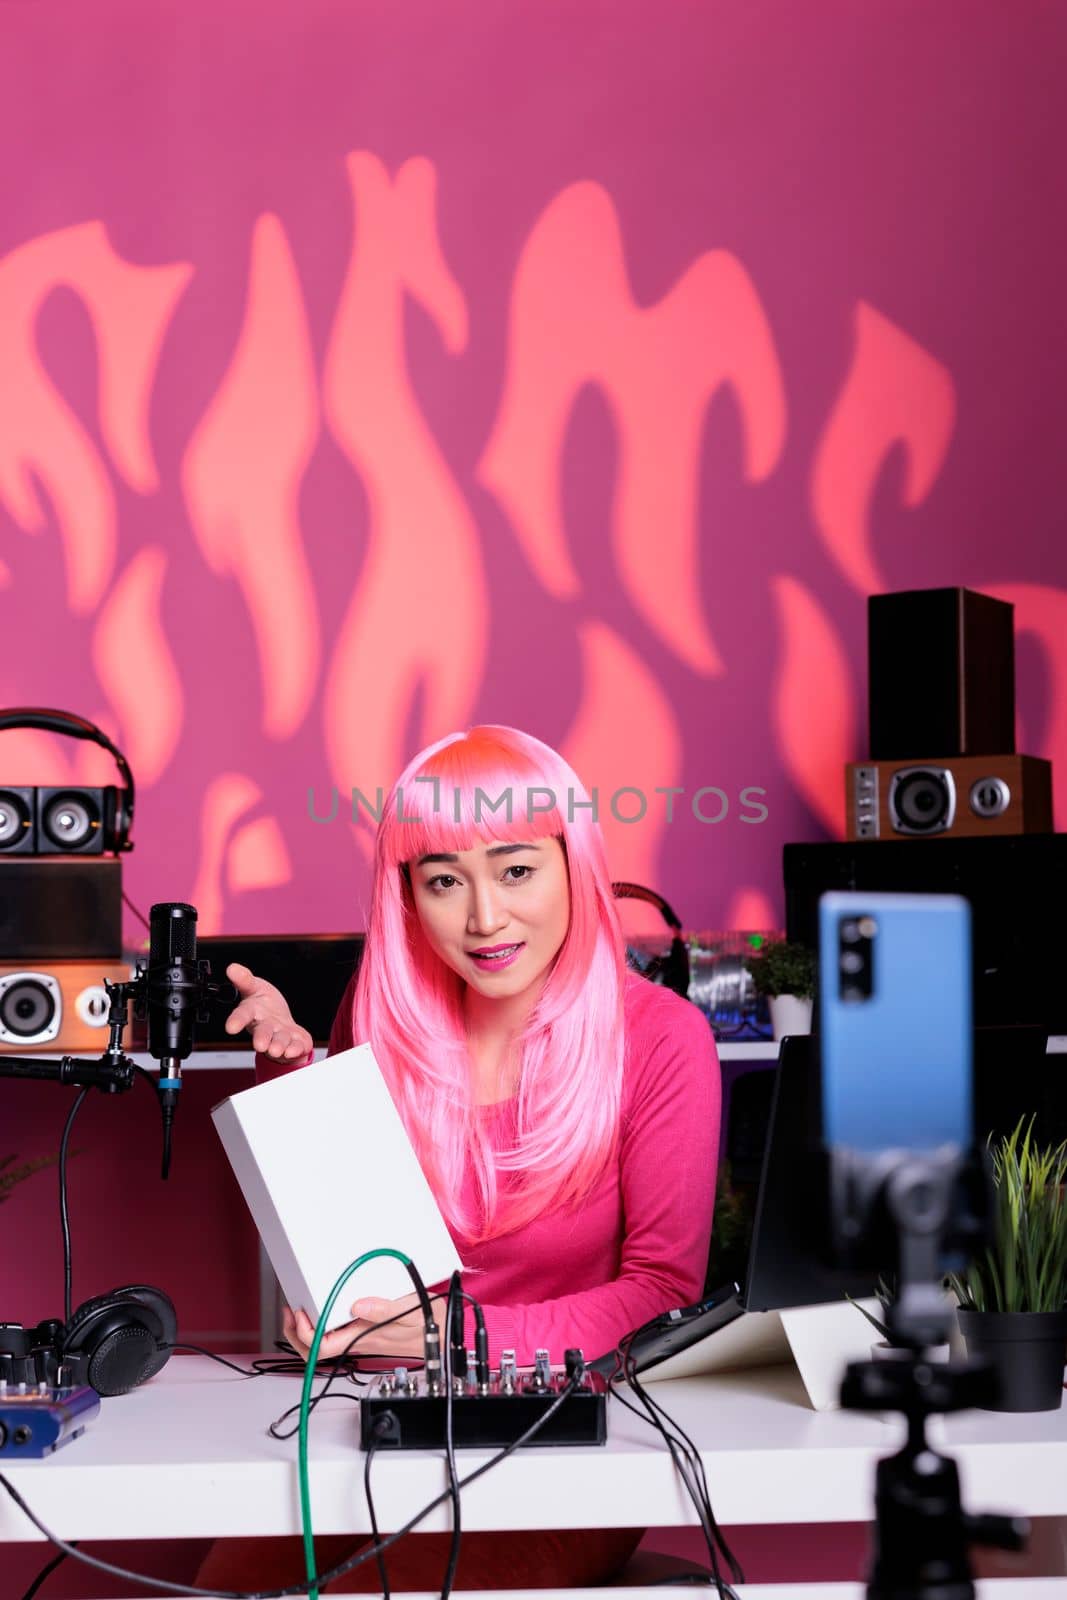 Content creator with pink hair holding white box presenting product in front of phone camera, filming review for vlogging channel. Asian influencer recording vlog using professional vlogging equipment